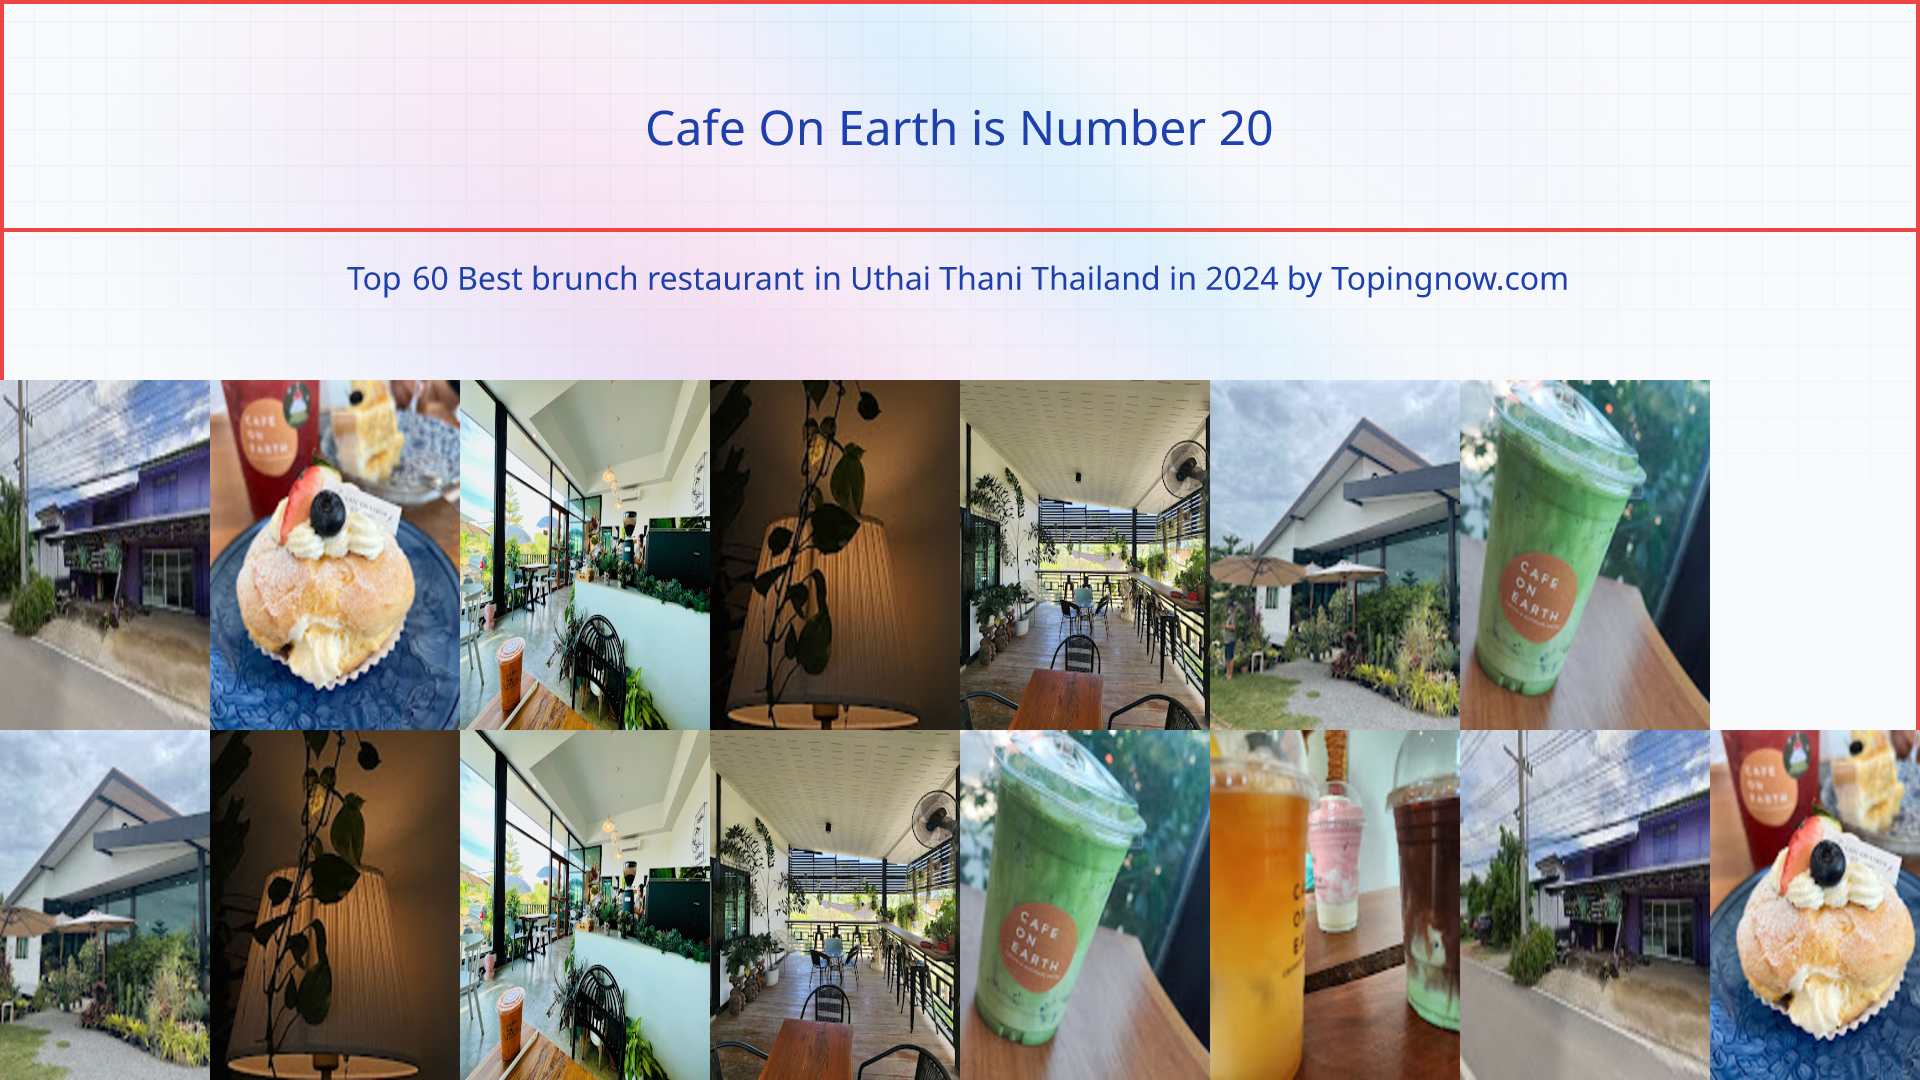 Cafe On Earth: Top 60 Best brunch restaurant in Uthai Thani Thailand in 2024